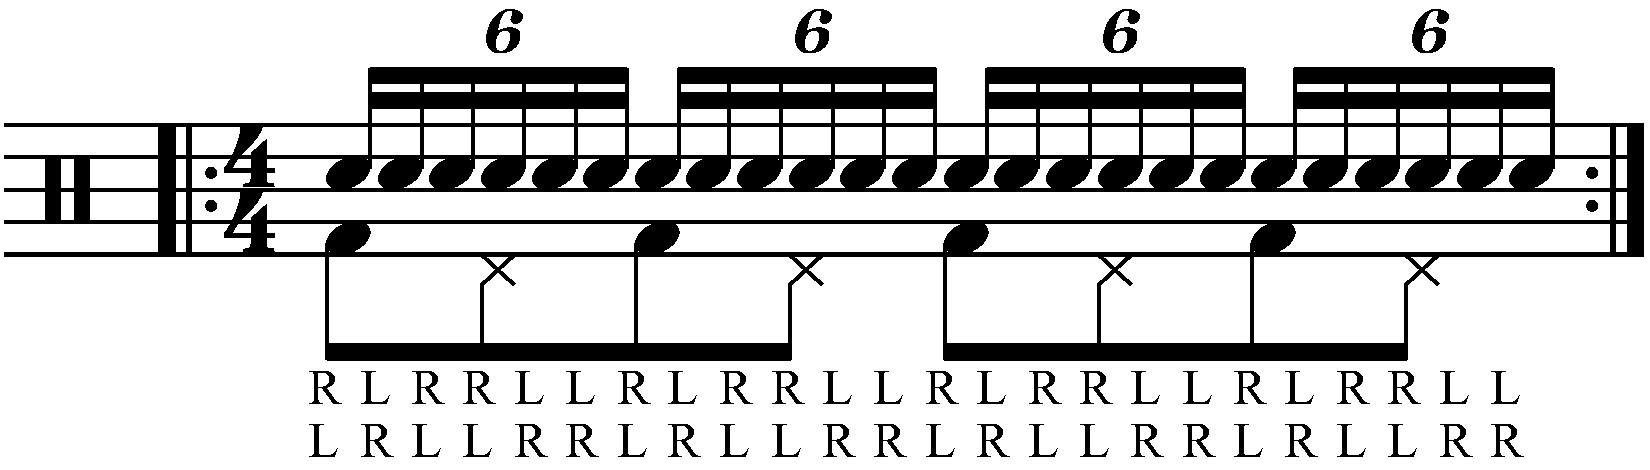 Adding eighth note feet under a paradiddle diddle